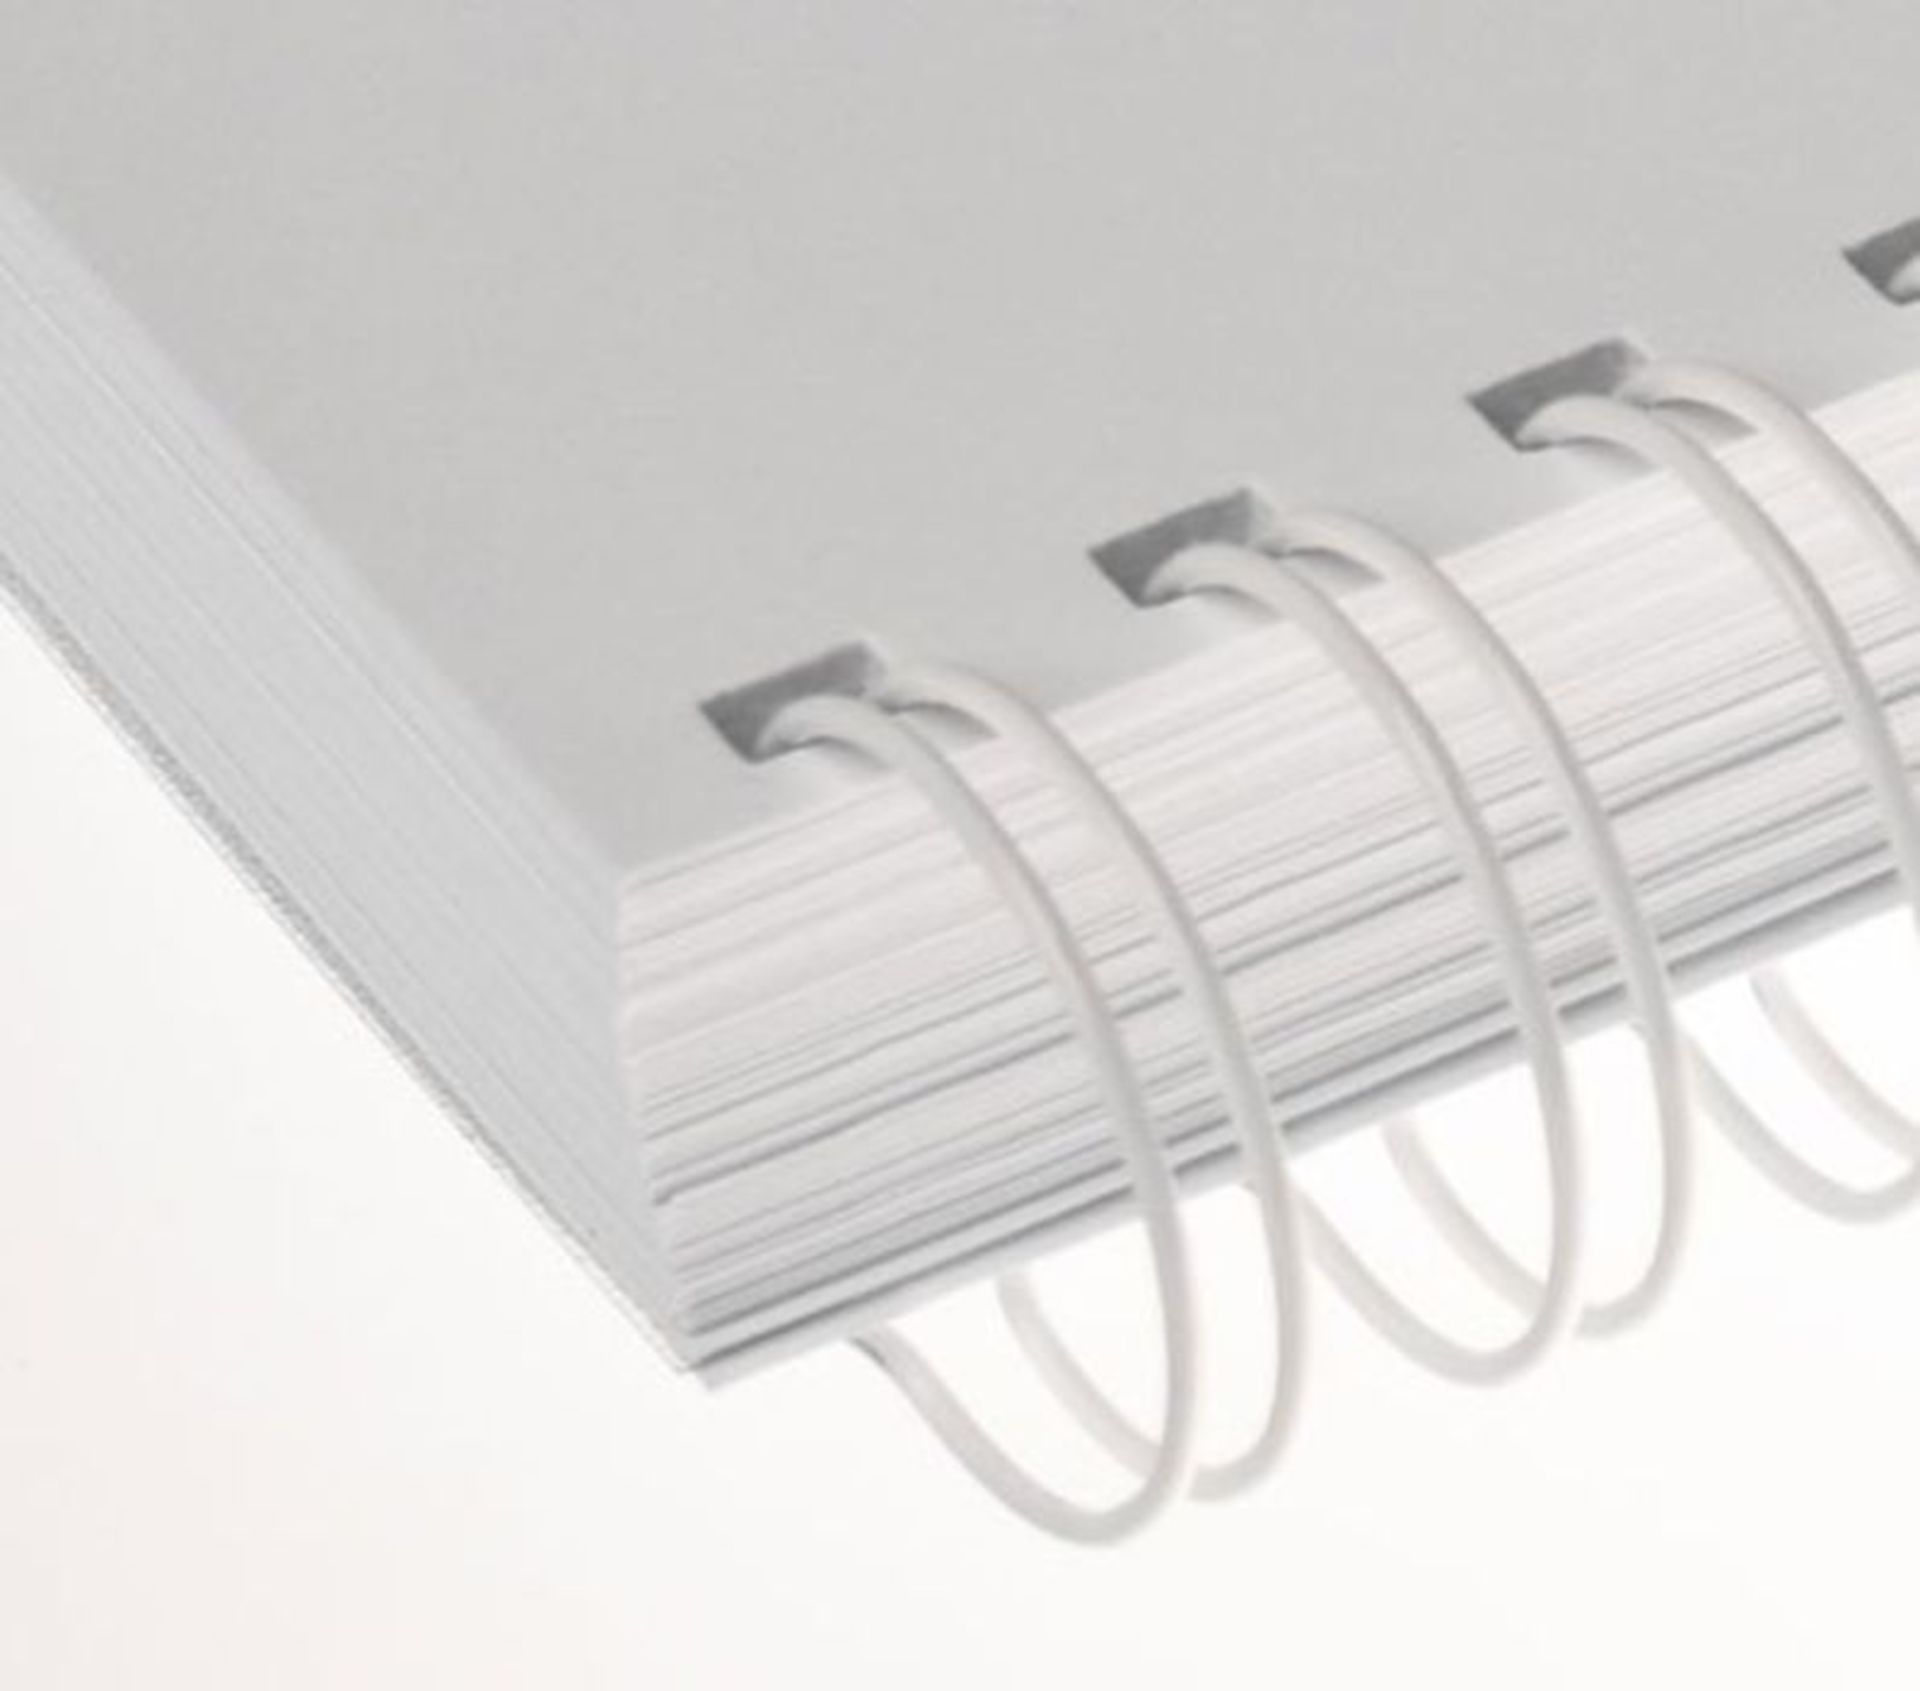 Renz 311600034 16.0 mm Ring Wire Cut Element - White. 3:1 Pitch. A4. 50 Wires per Box.